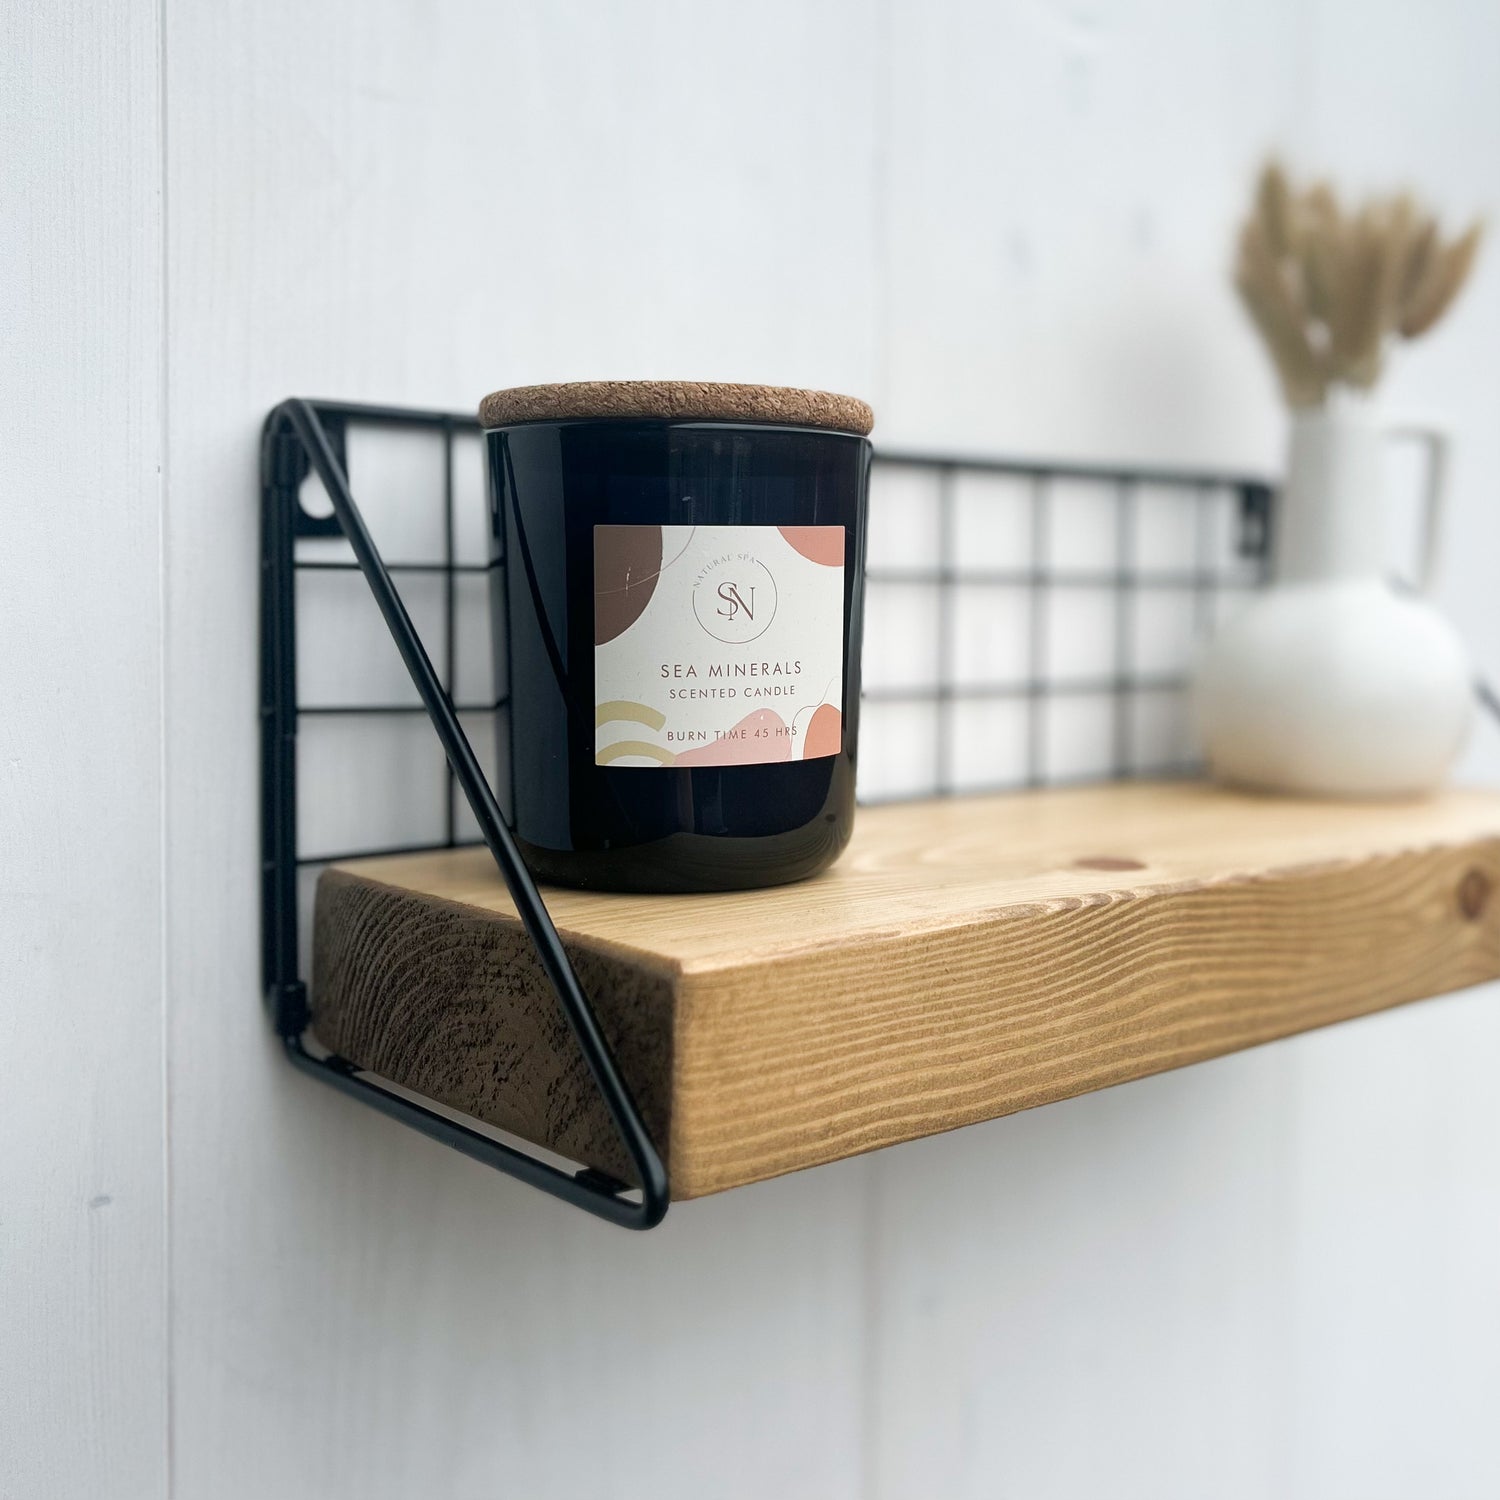 Rustic Wooden Mesh Wall Decor Shelf handcrafted in the UK  Masterplank UK   